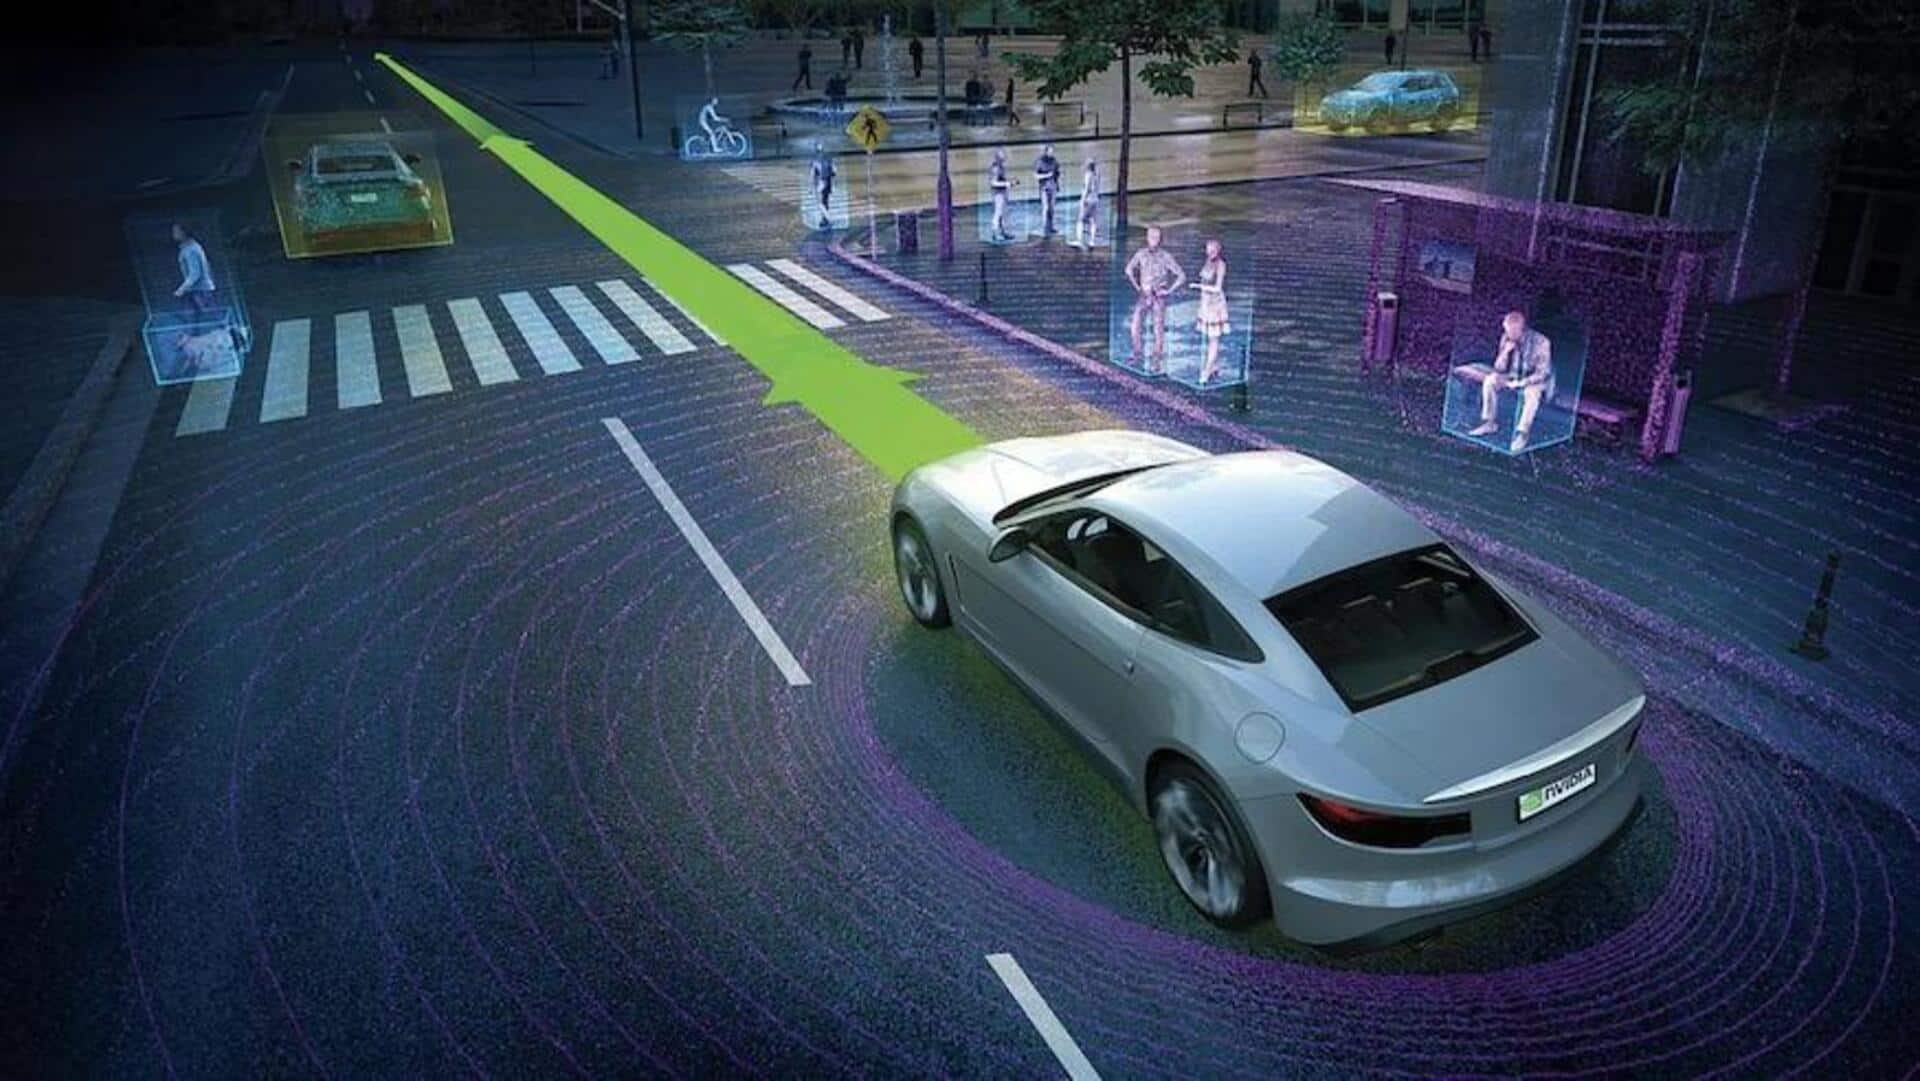 Different levels of self-driving technology in cars, explained